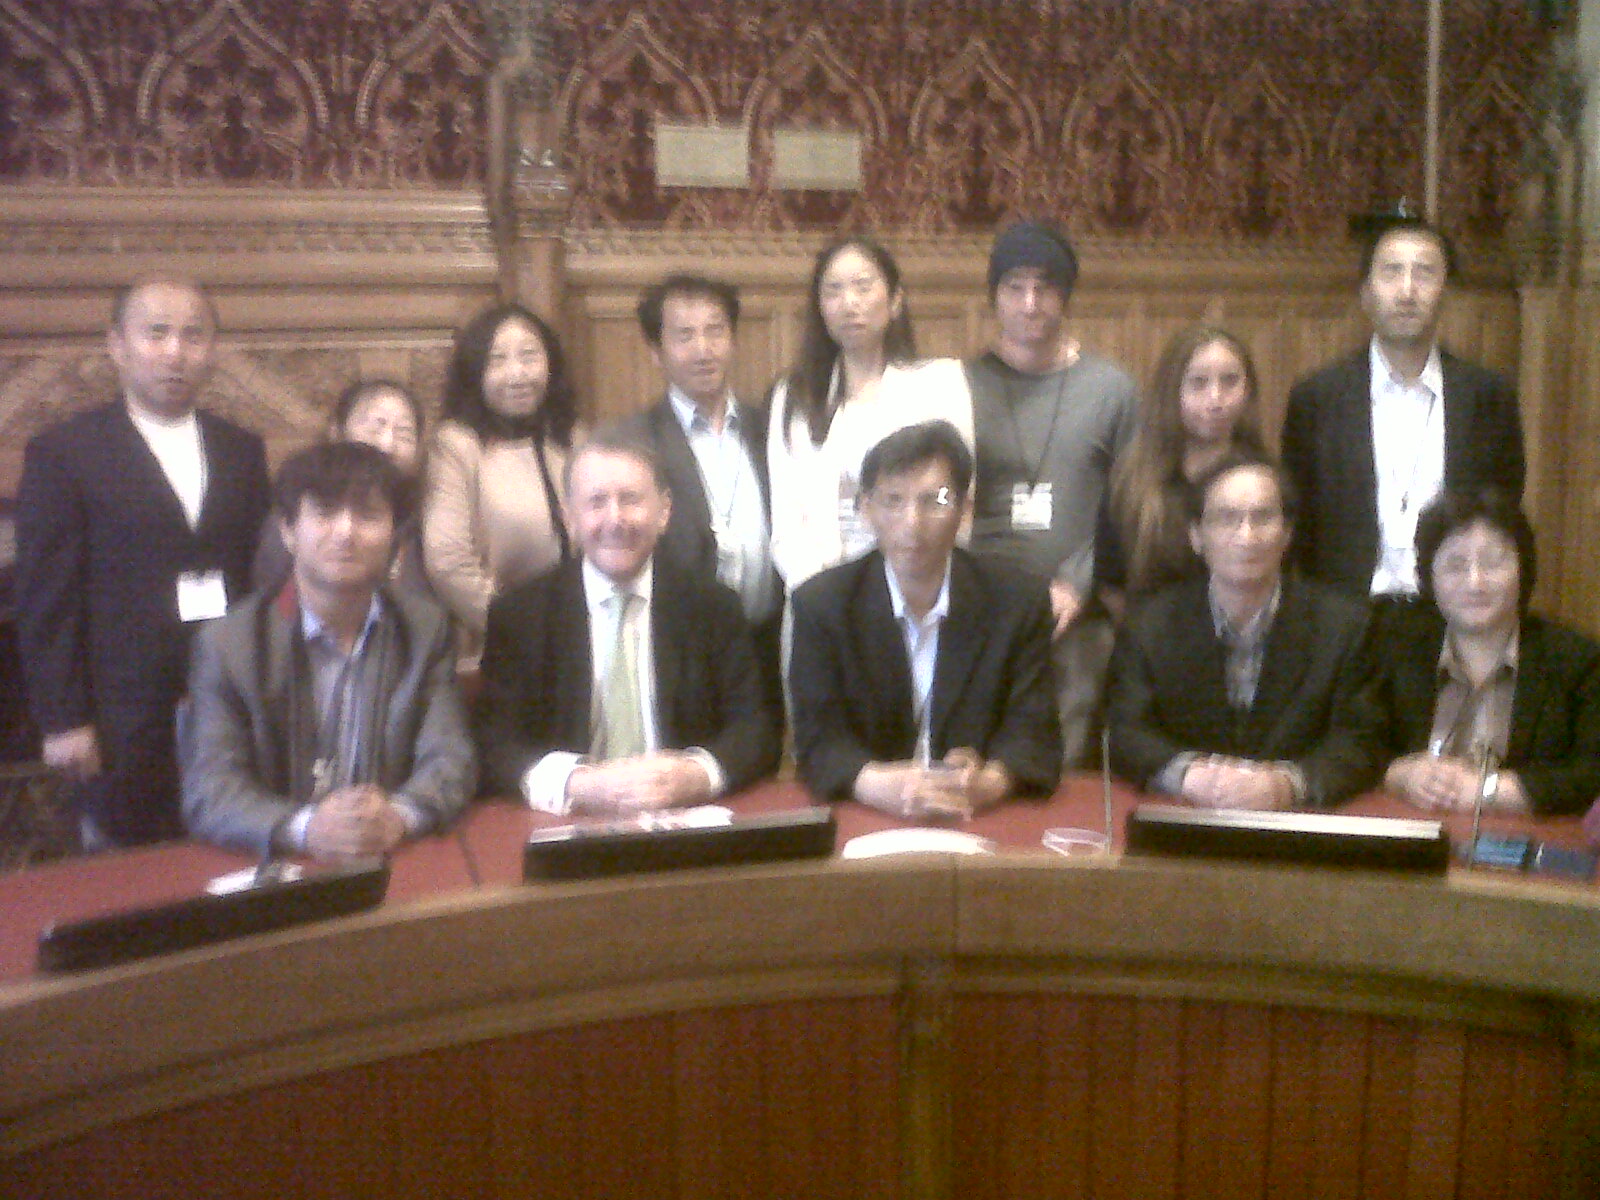 The Defector - shown in the British Parliament by Ann Shin - who made the powerful documentary